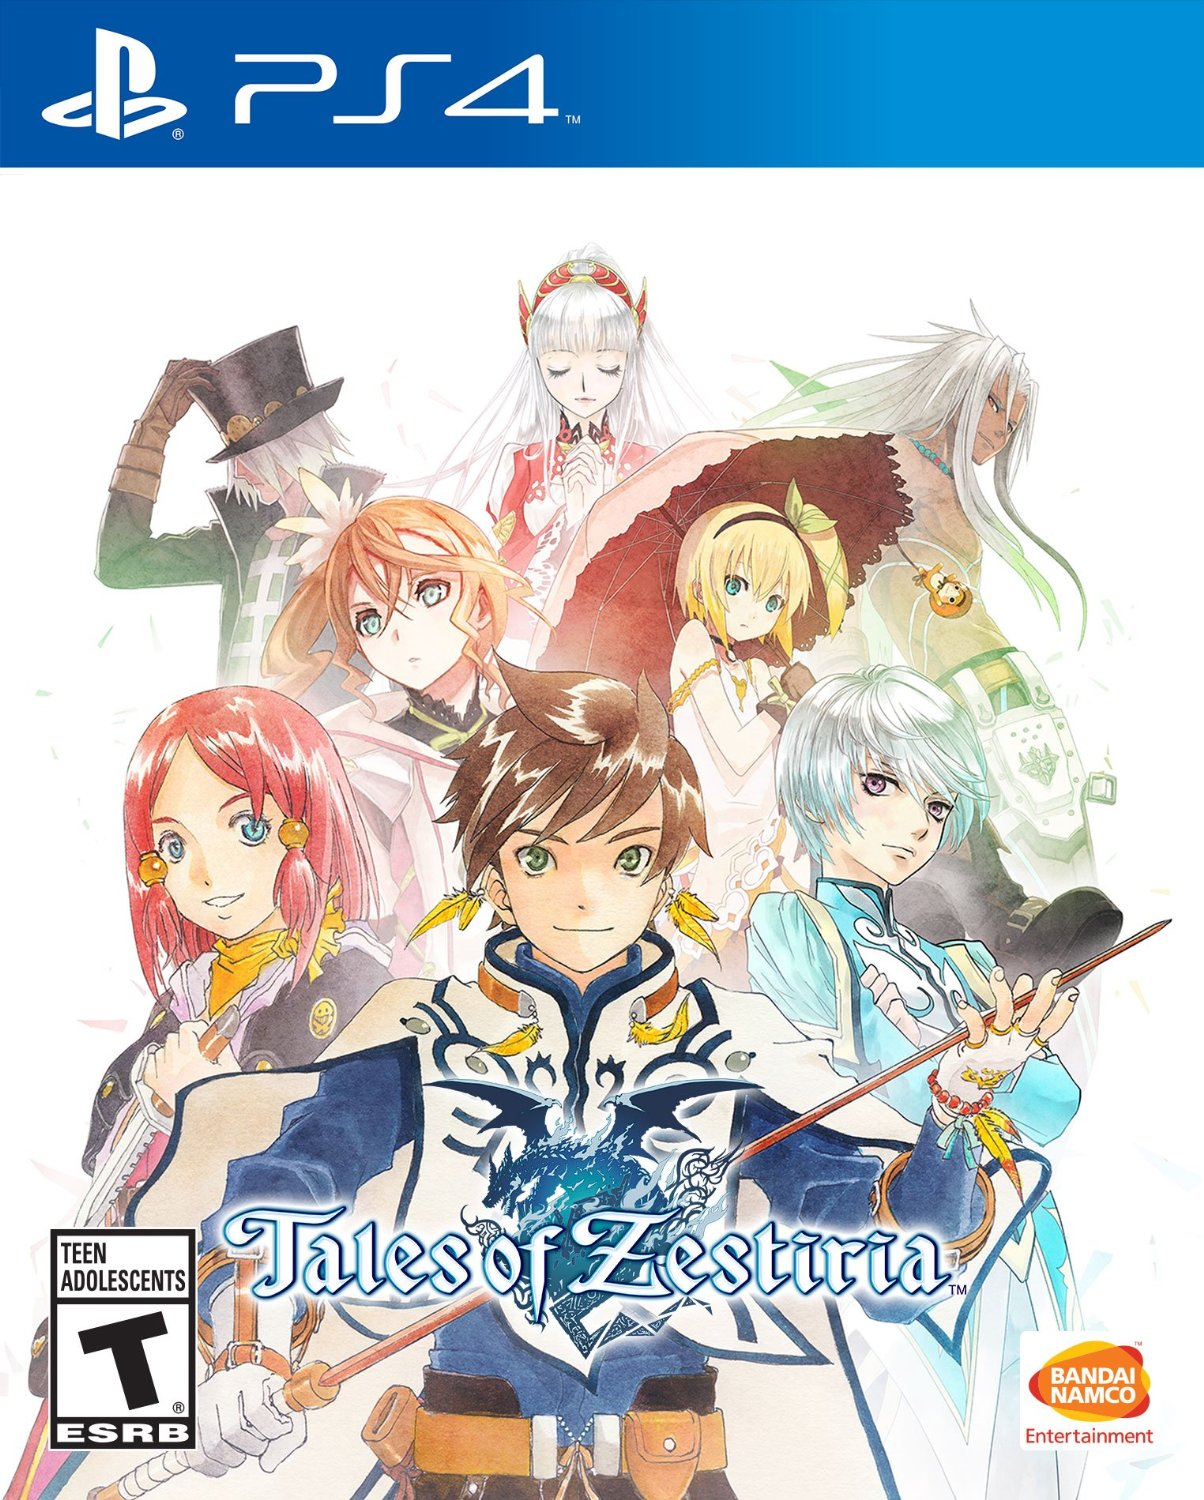 Sorry, no screenshots. Zestiria blocks the PS4's Share feature for some reason. What is it with recent JRPGs and blocking important console features?